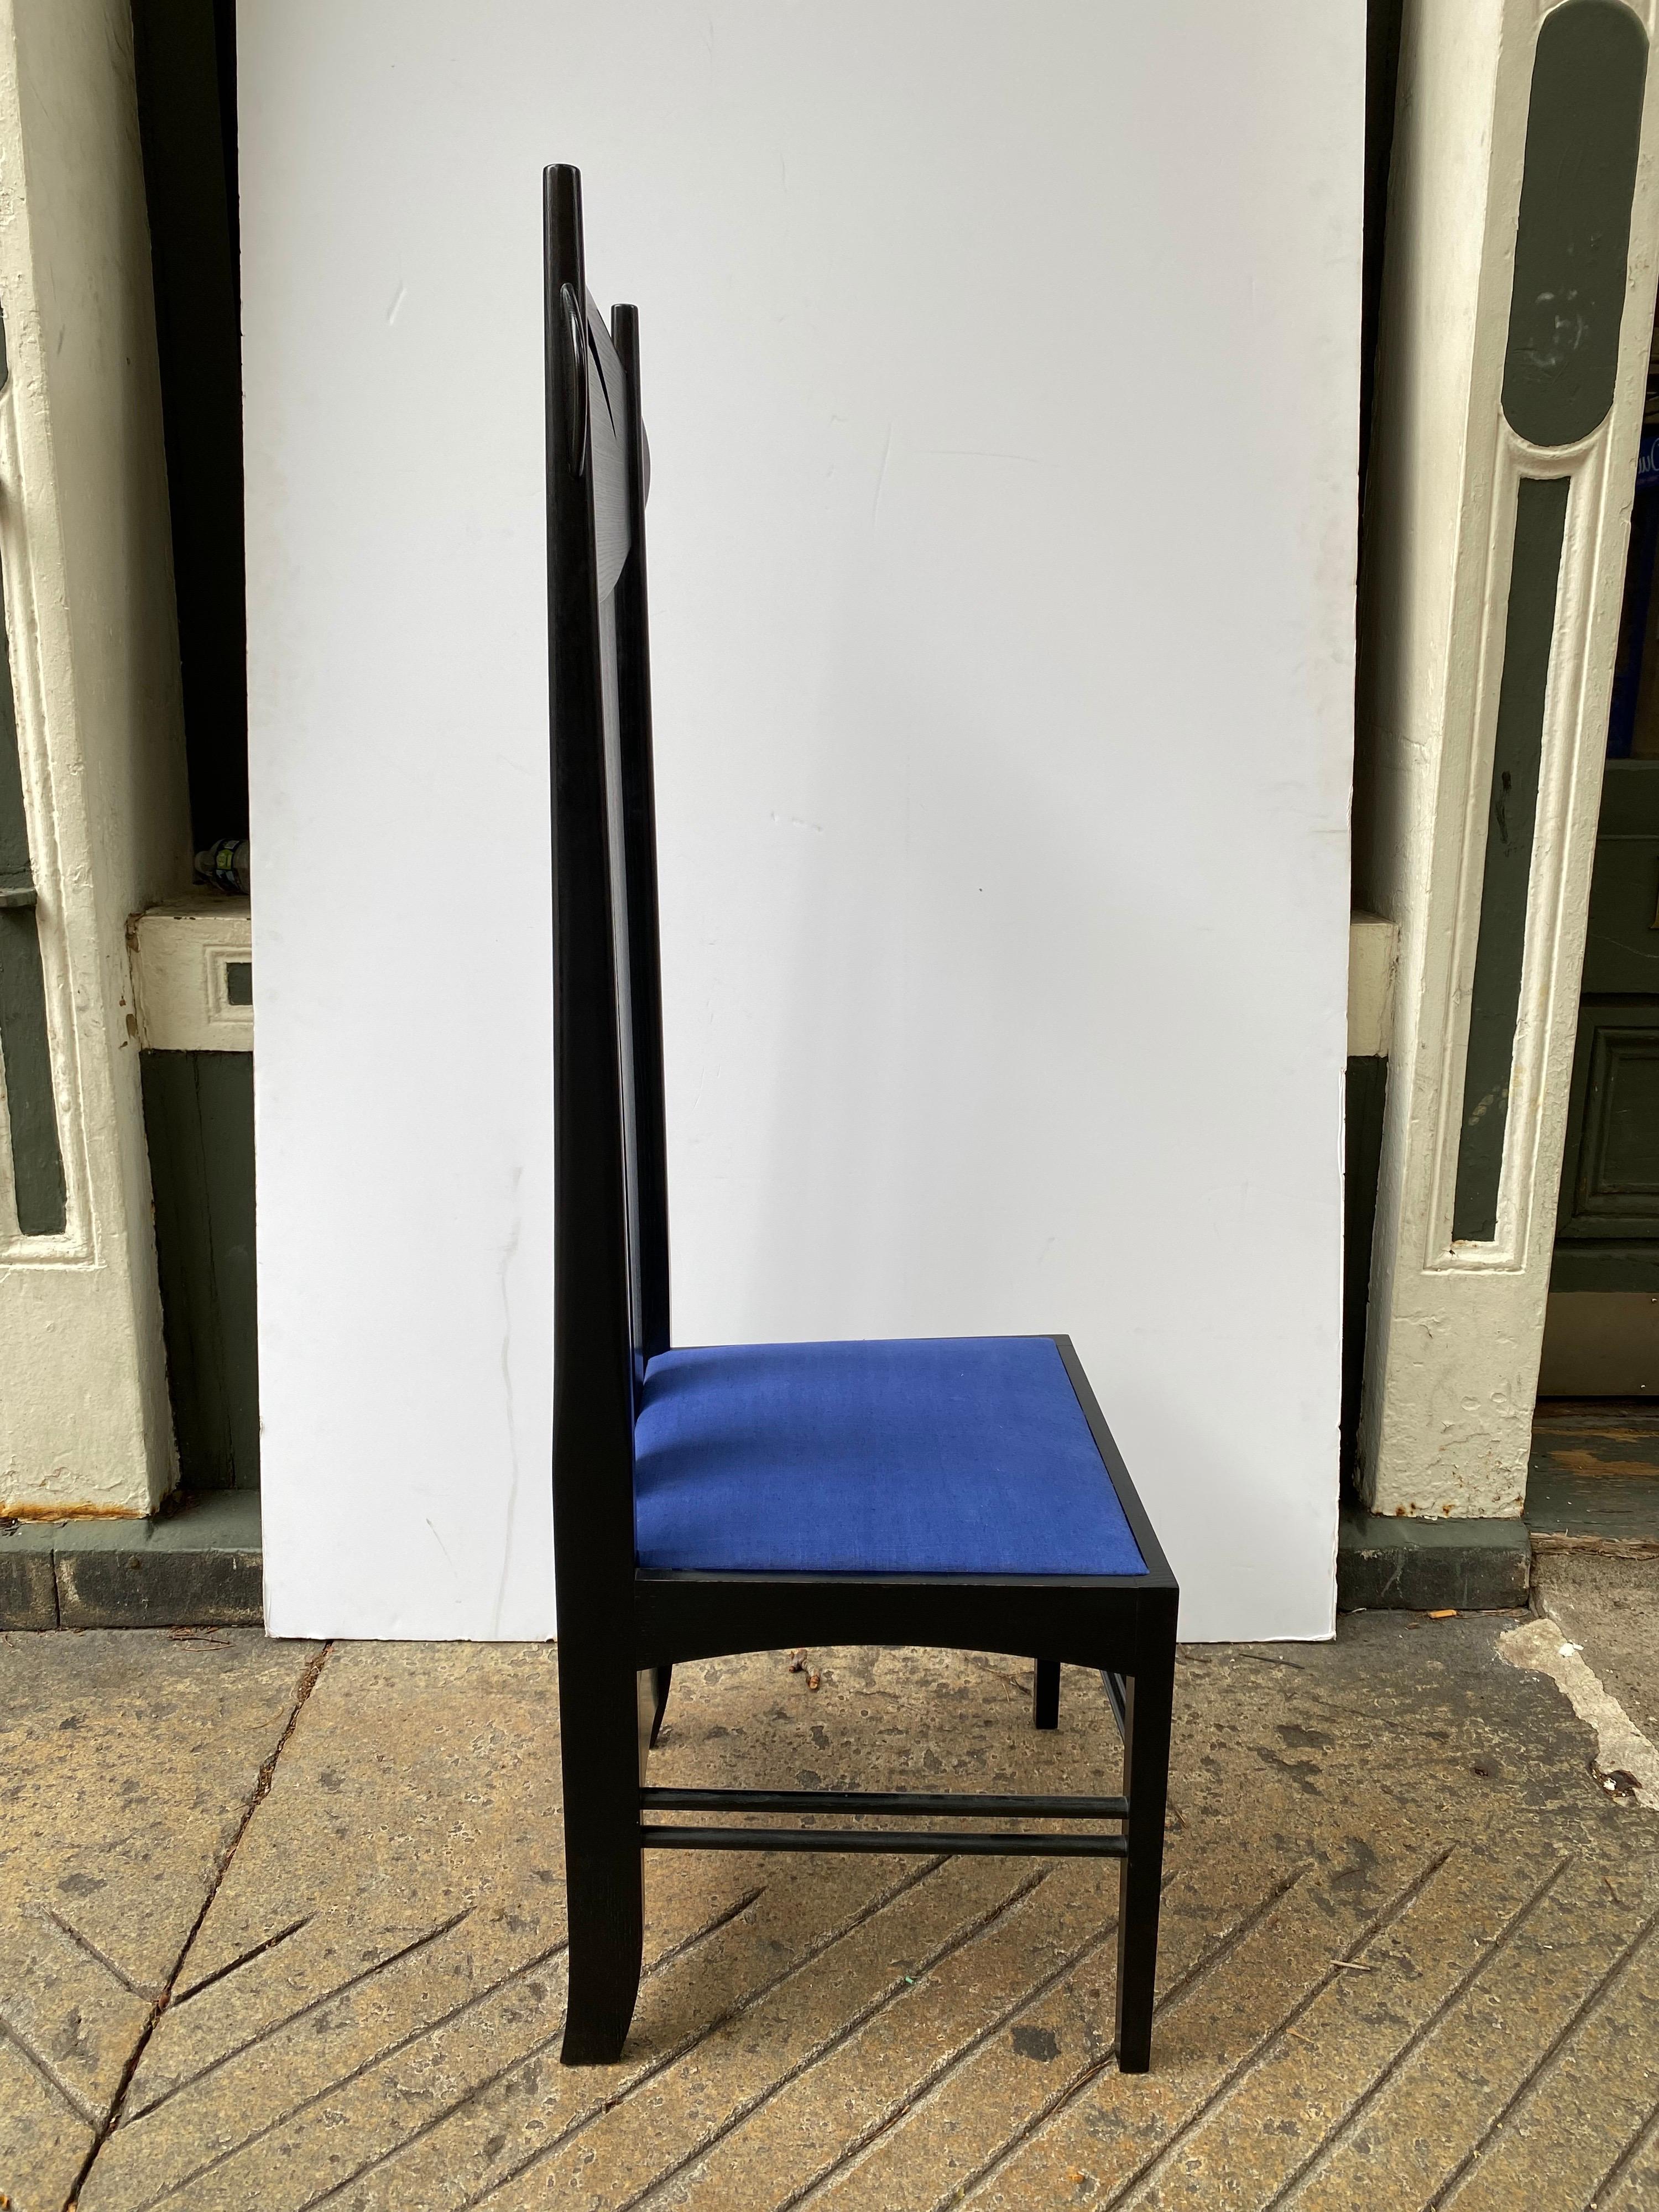 Argyle chair by Charles Rennie Mackintosh. Produced under License agreement by Cassina Italy. Nice Clean example in very nice shape. Original blue fabric seat pad is very nice. Signed and numbered to inside of seat.